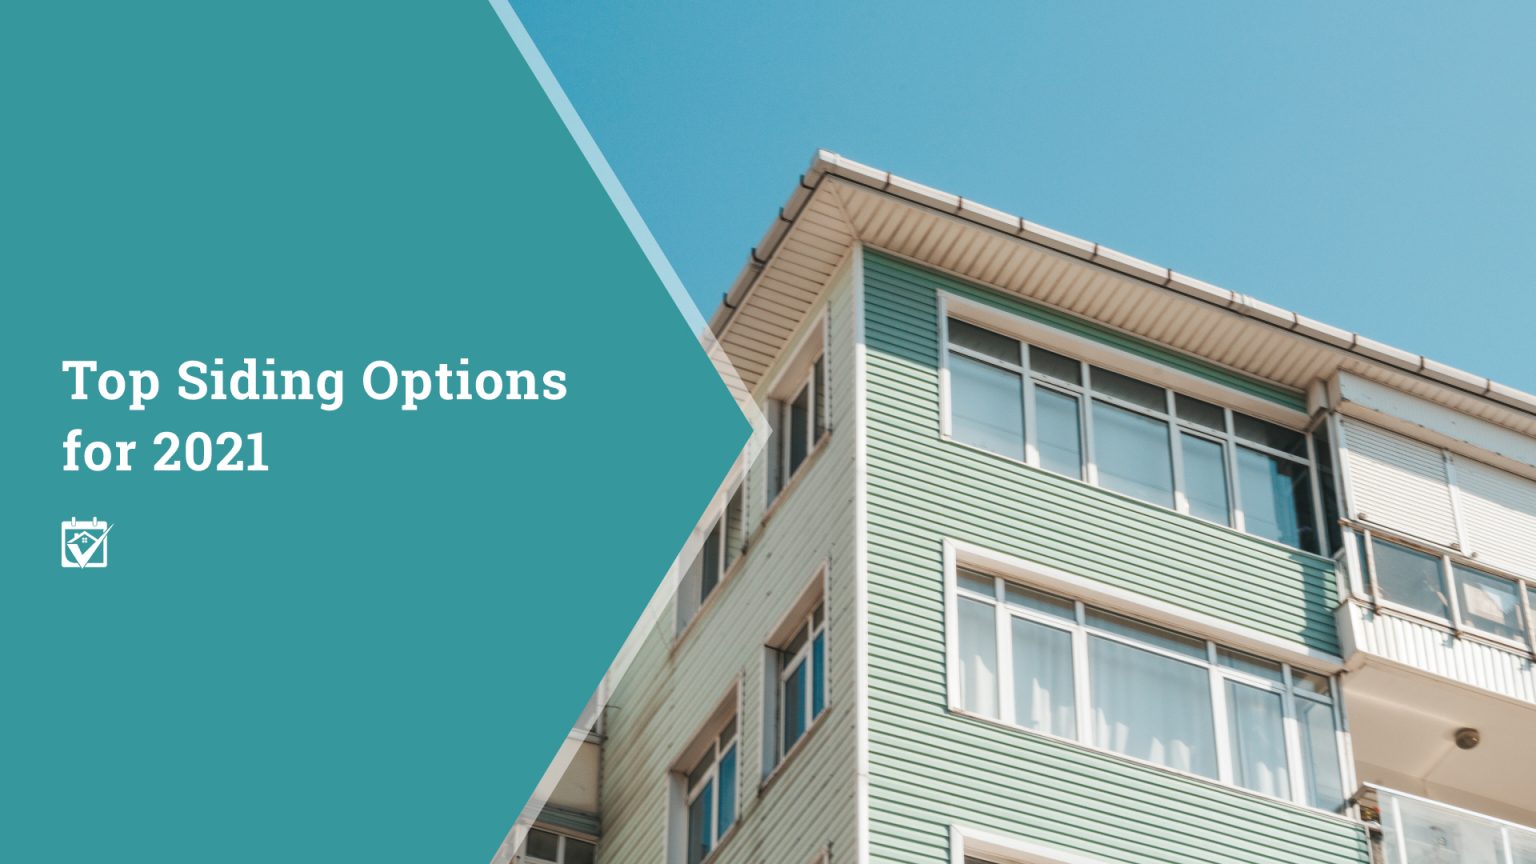 Top Siding Options for 2021